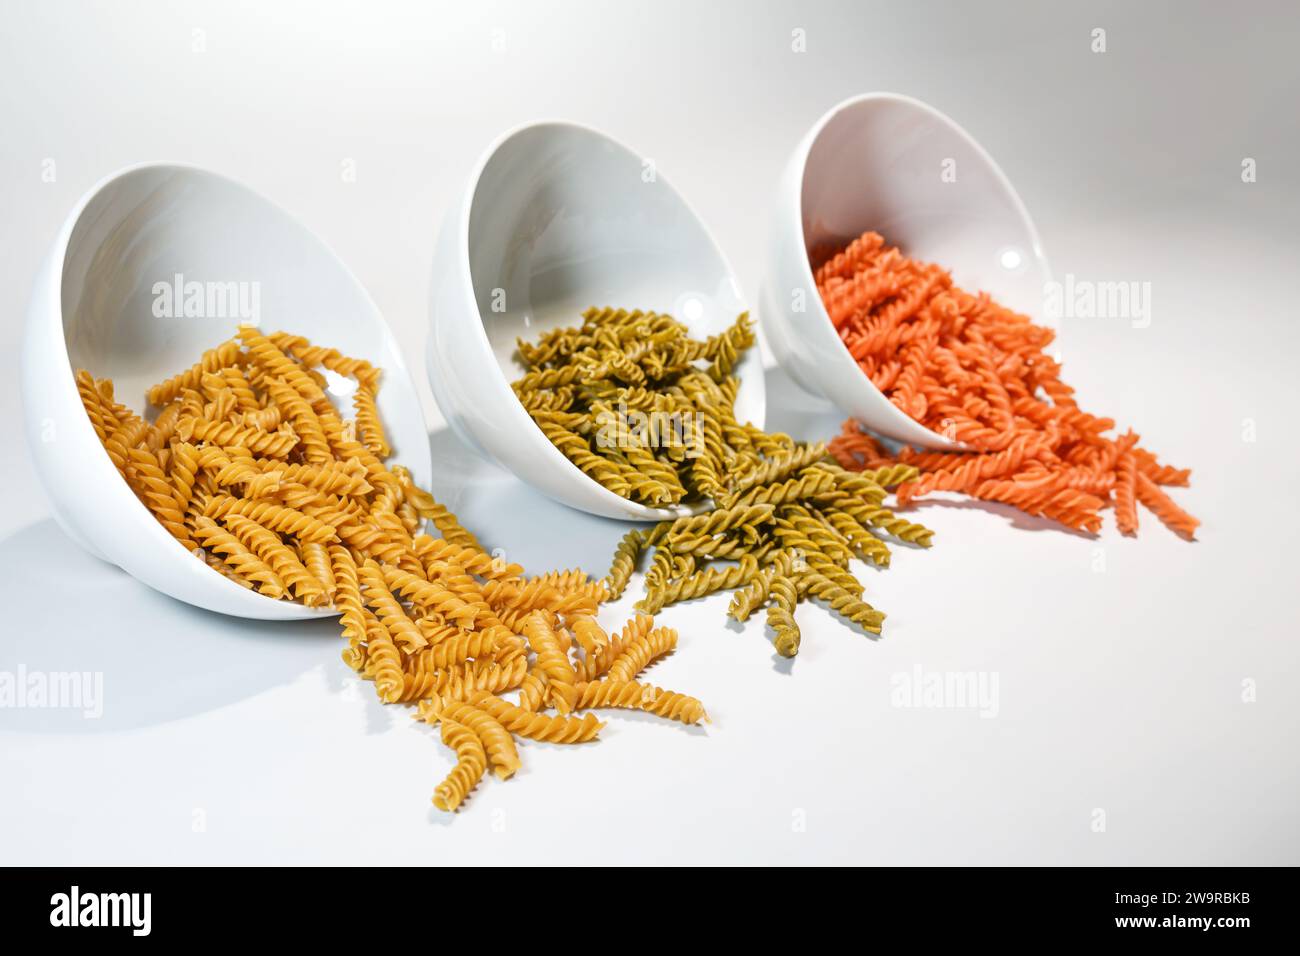 Three white bowls with different legume pasta fusilli made from chickpeas, mung beans and red lentils, diet alternative with less carbohydrates but mo Stock Photo